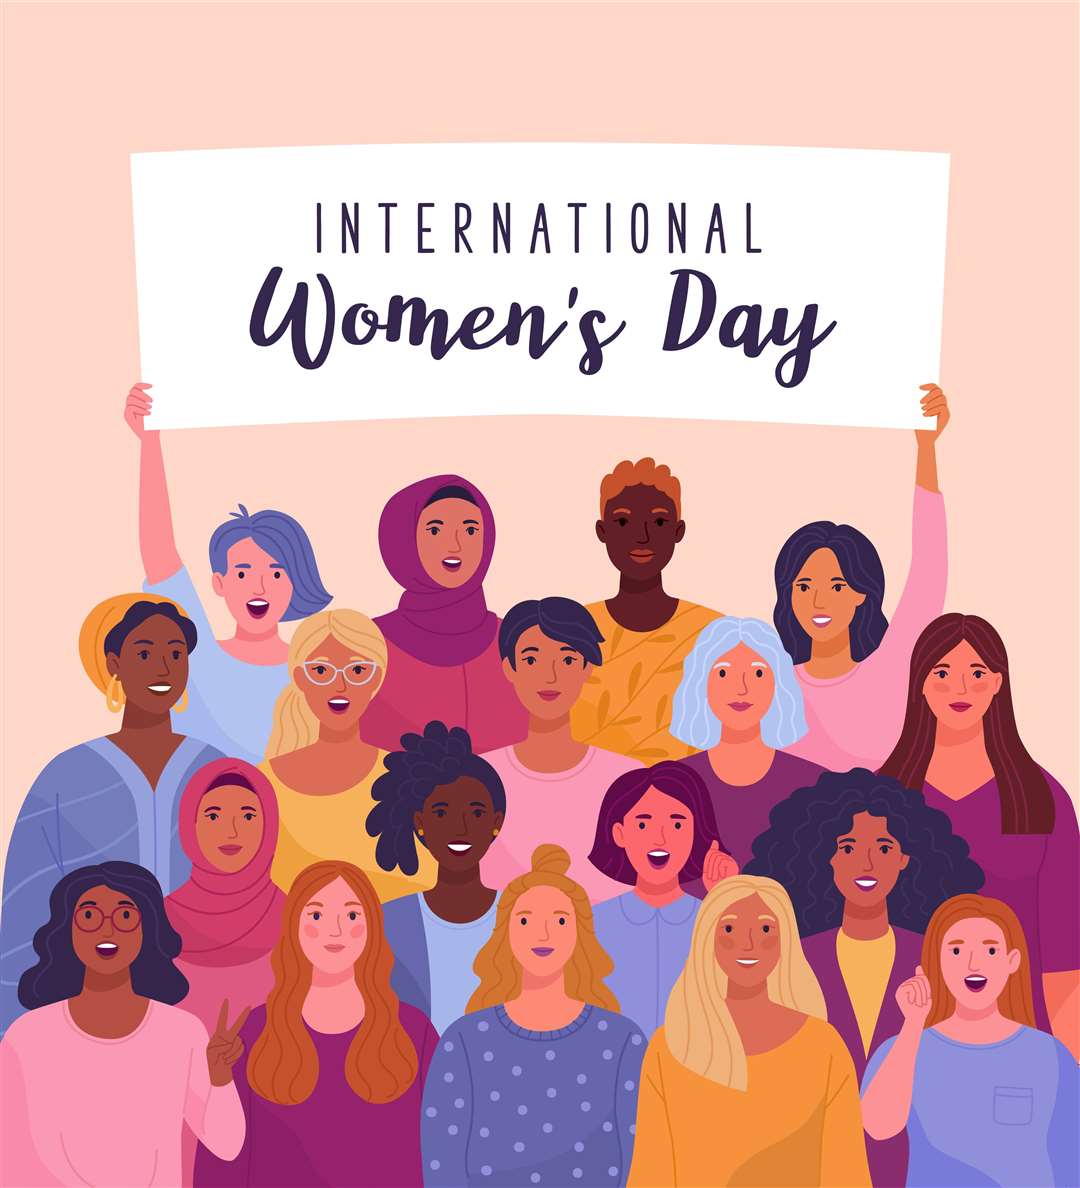 International Women's Day takes place on March 8 every year.